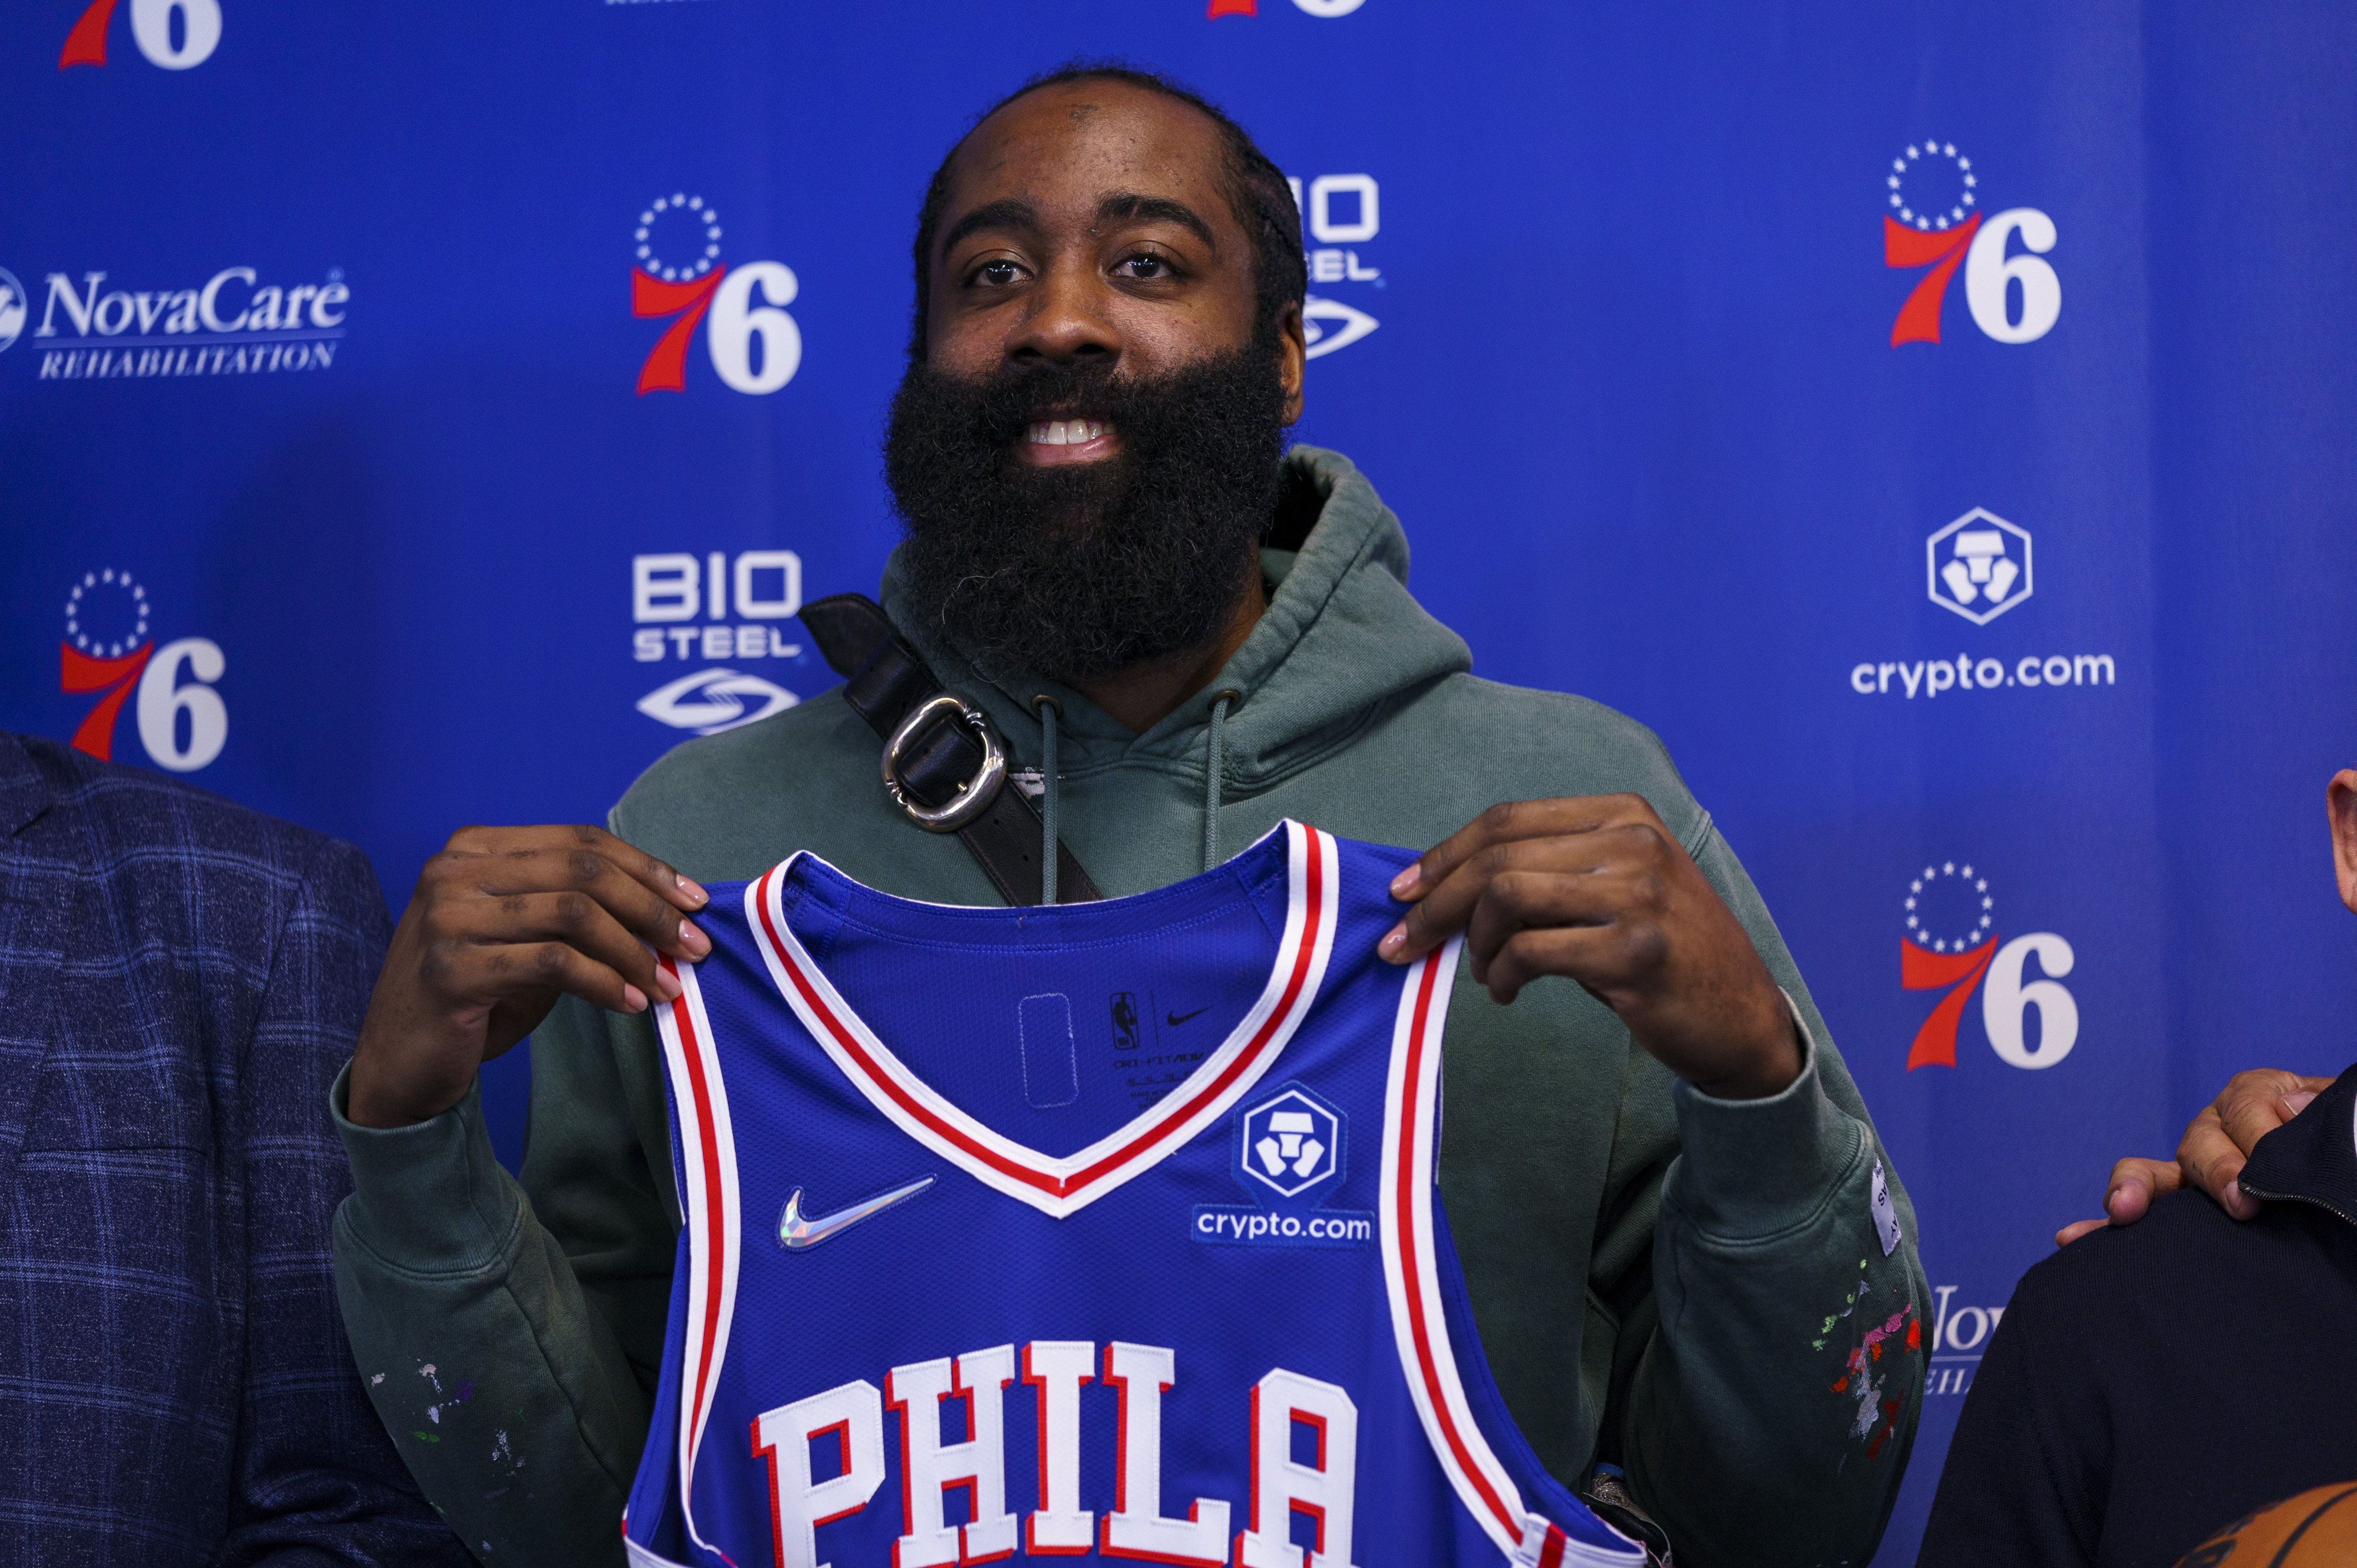 Playmaker on X: First look of James Harden in a Philly uniform 👀 Rate  this trade 1-10  / X